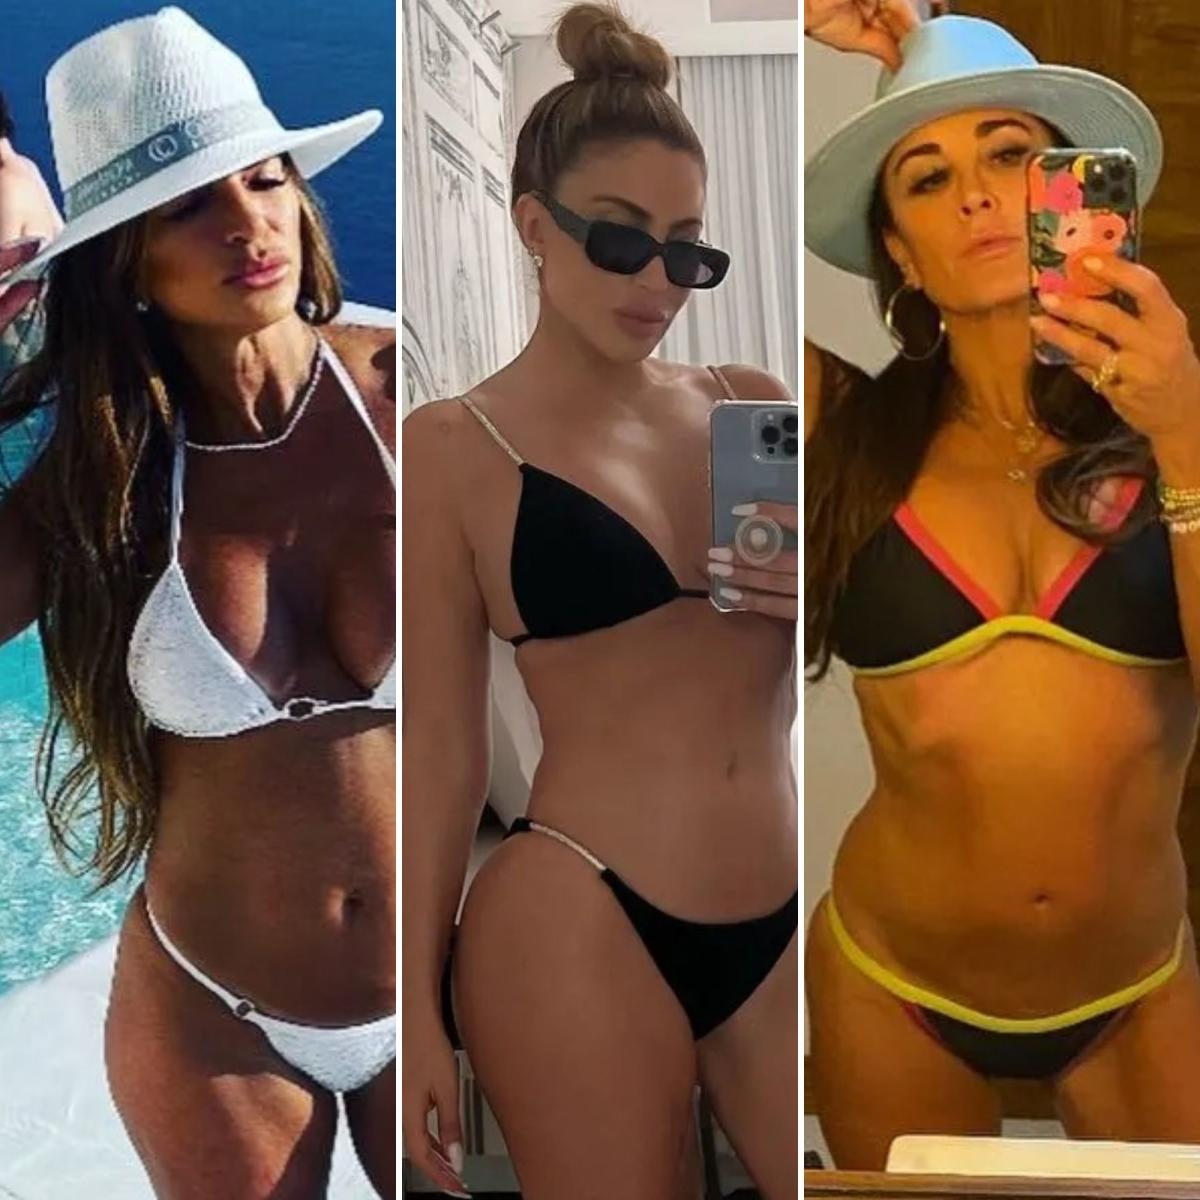 These Real Housewives Stars Are Seriously Hot See Their Best Bikini Moments Over the Years!